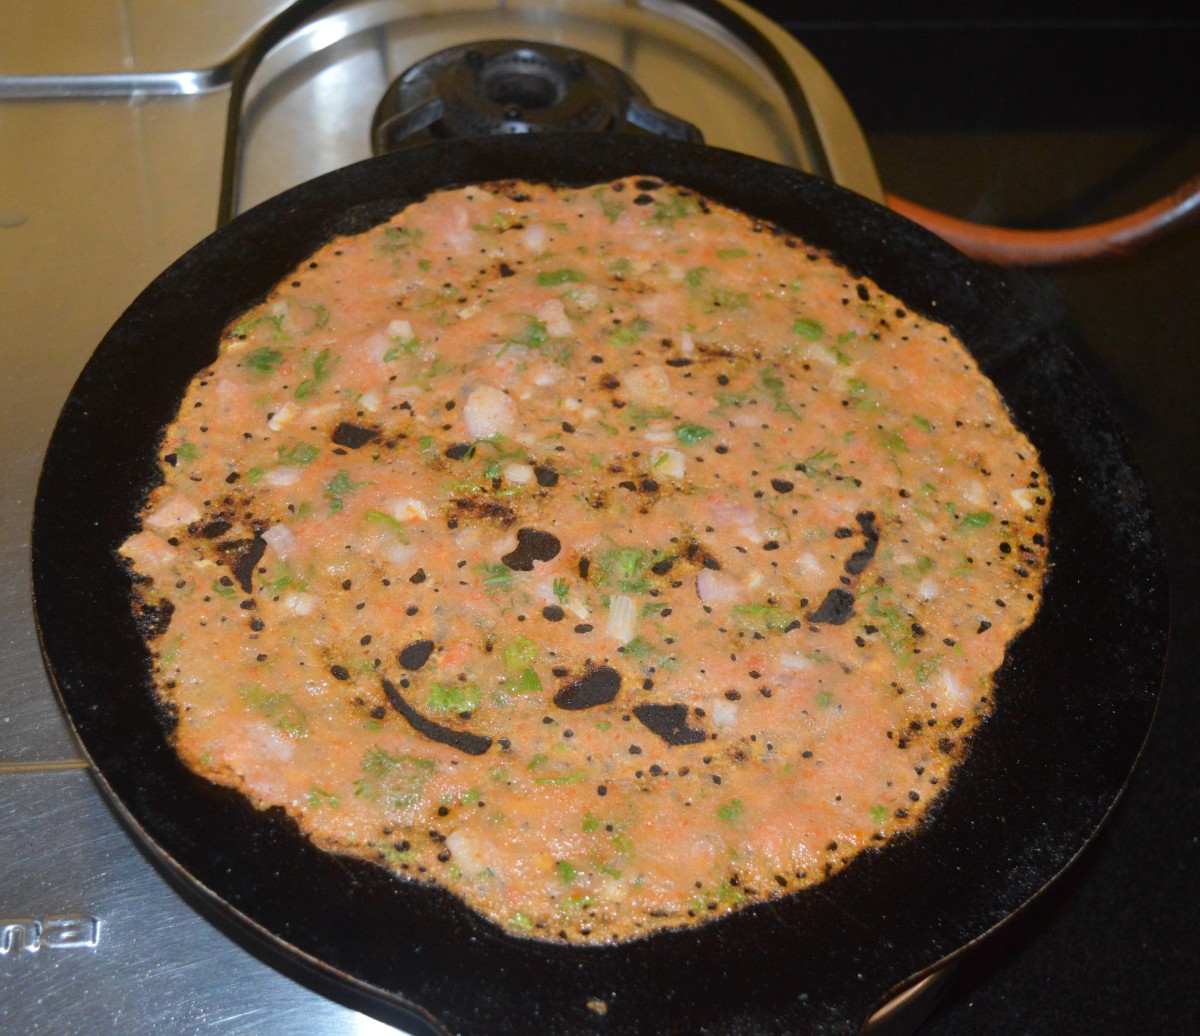 Step three: Add a few drops of oil to the edges and the surface. Let the dosa get golden brown on the bottom side and cook well on the surface too. No need to flip it.